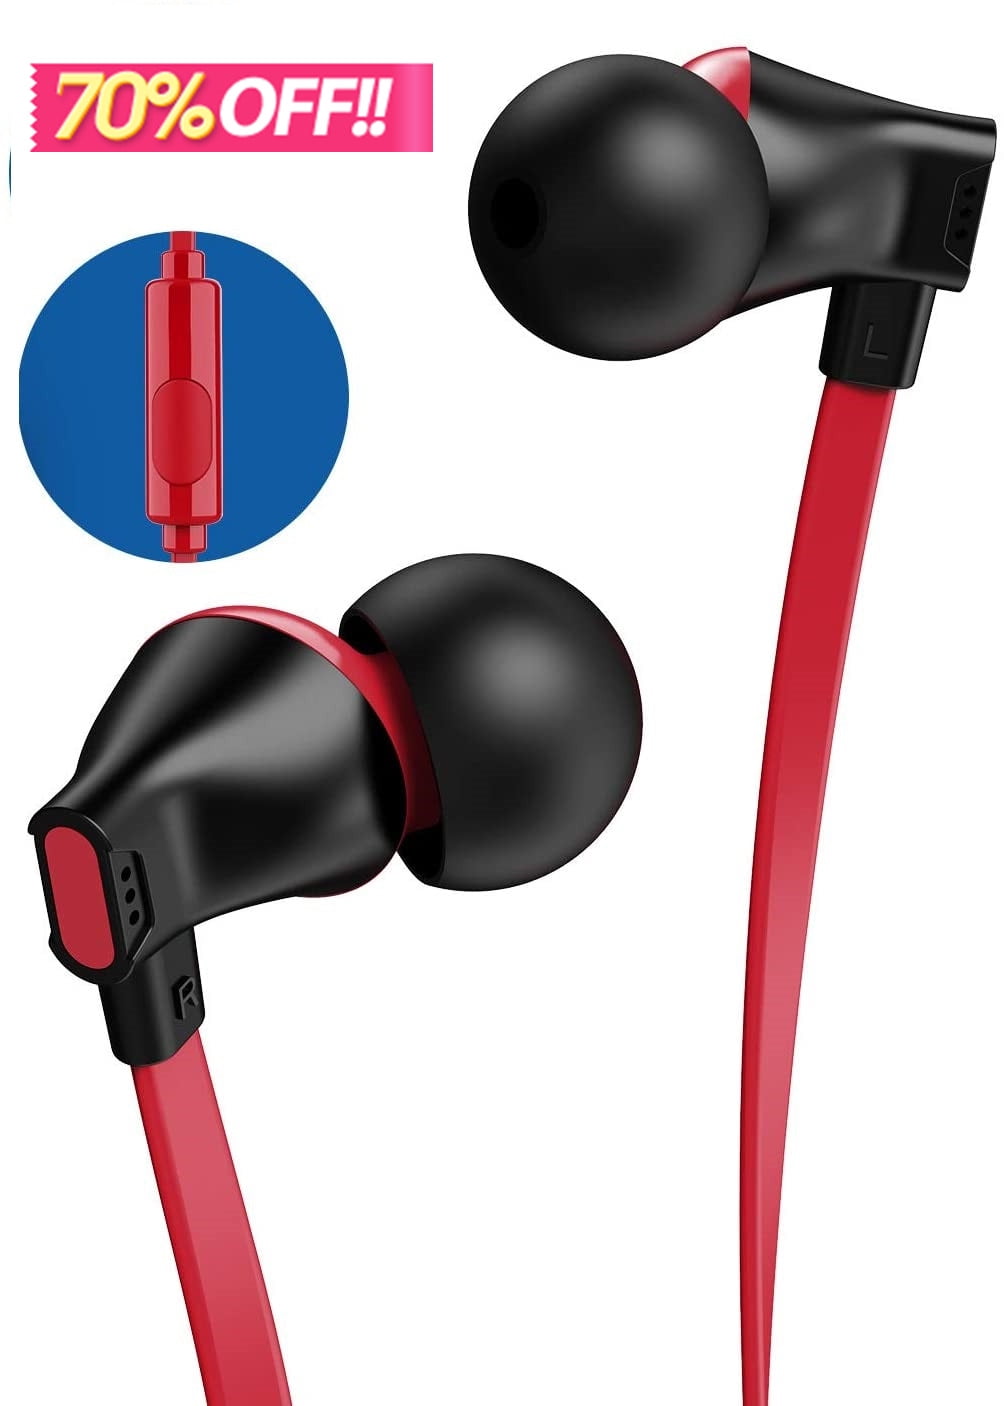 Earphones,in-Ear Headphones Stereo Earbuds with Microphone for iPhone, iPod, iPad, Samsung Black Red